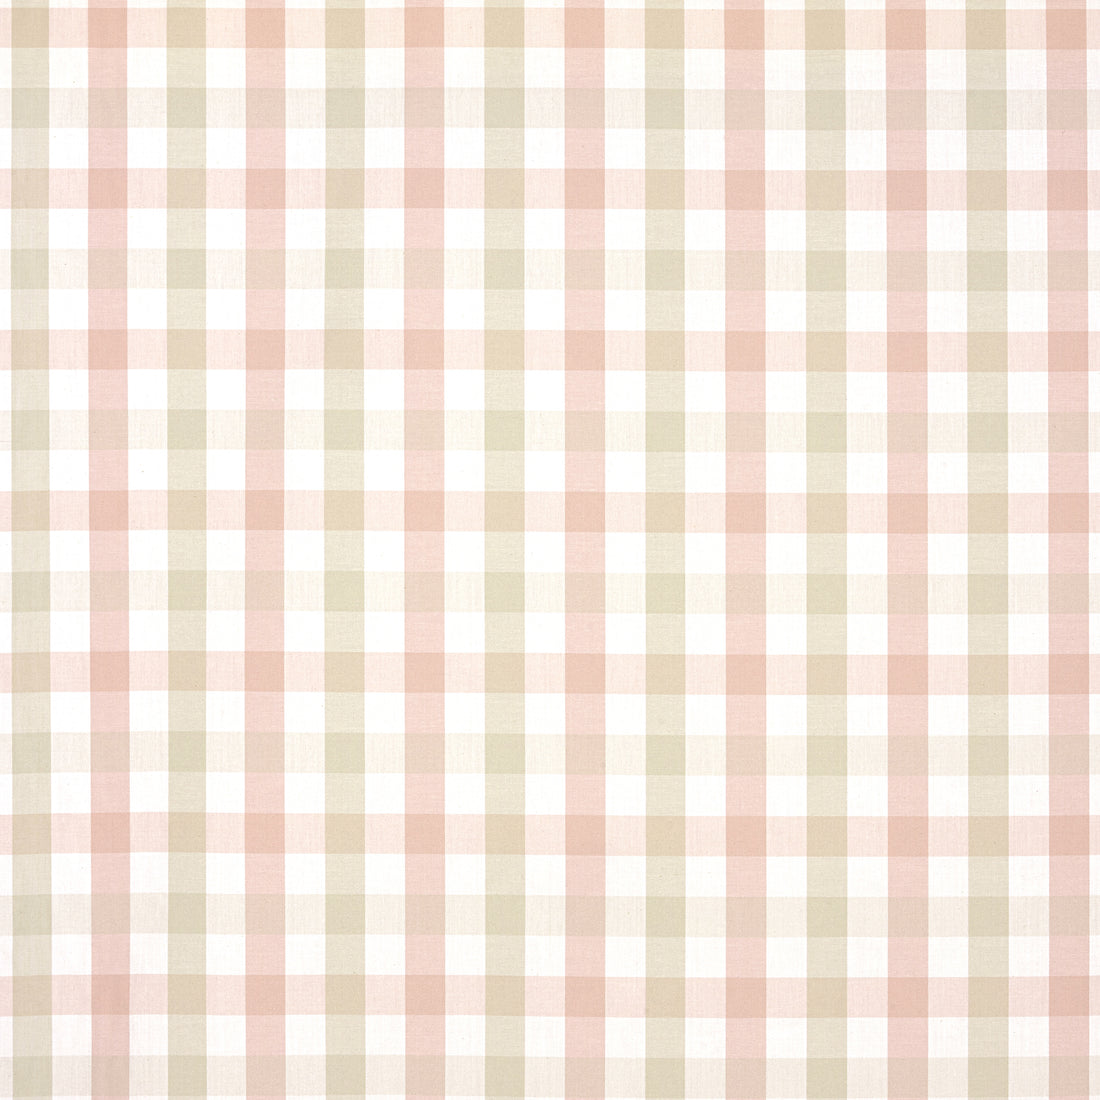 Saybrook Check fabric in pink and beige color - pattern number AW15149 - by Anna French in the Antilles collection